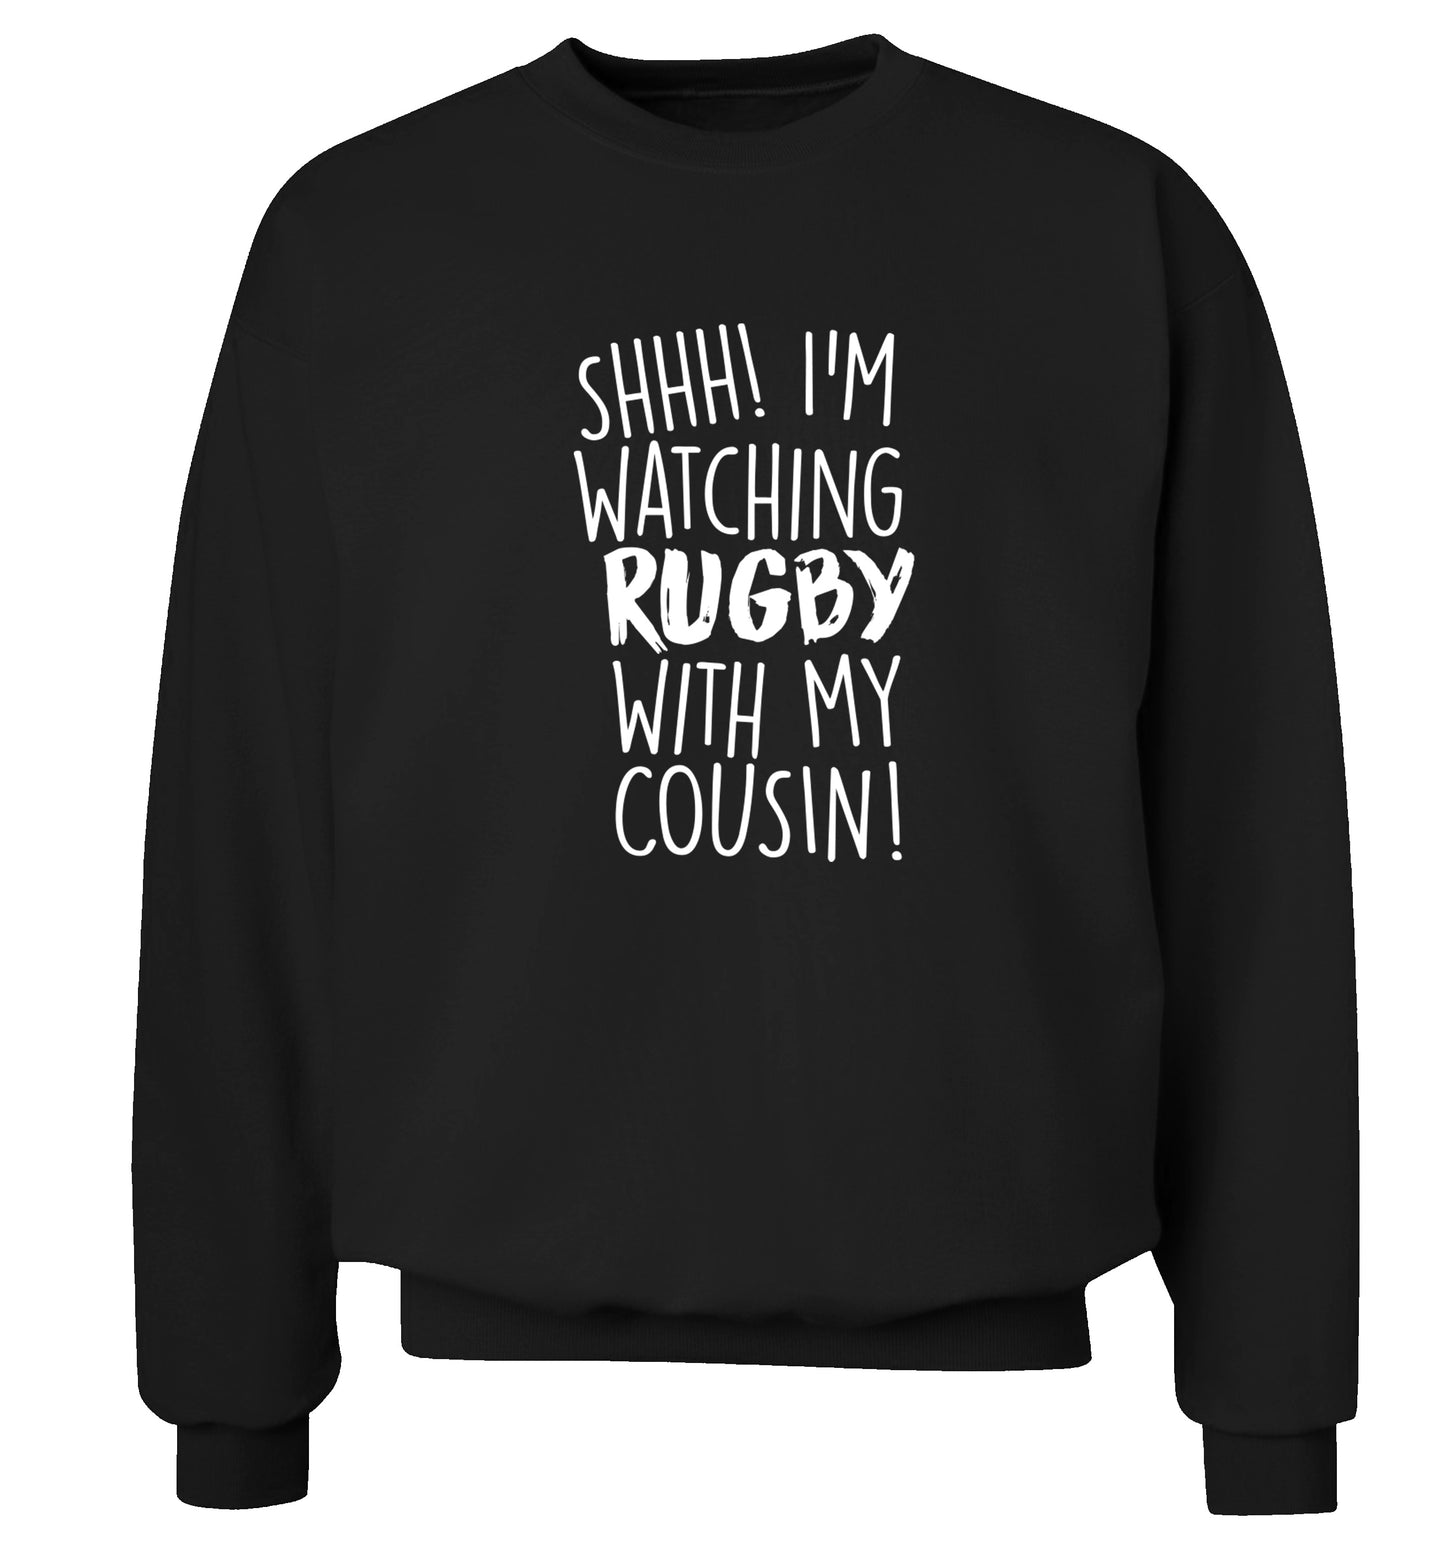 Shhh I'm watching rugby with my cousin Adult's unisex black Sweater 2XL